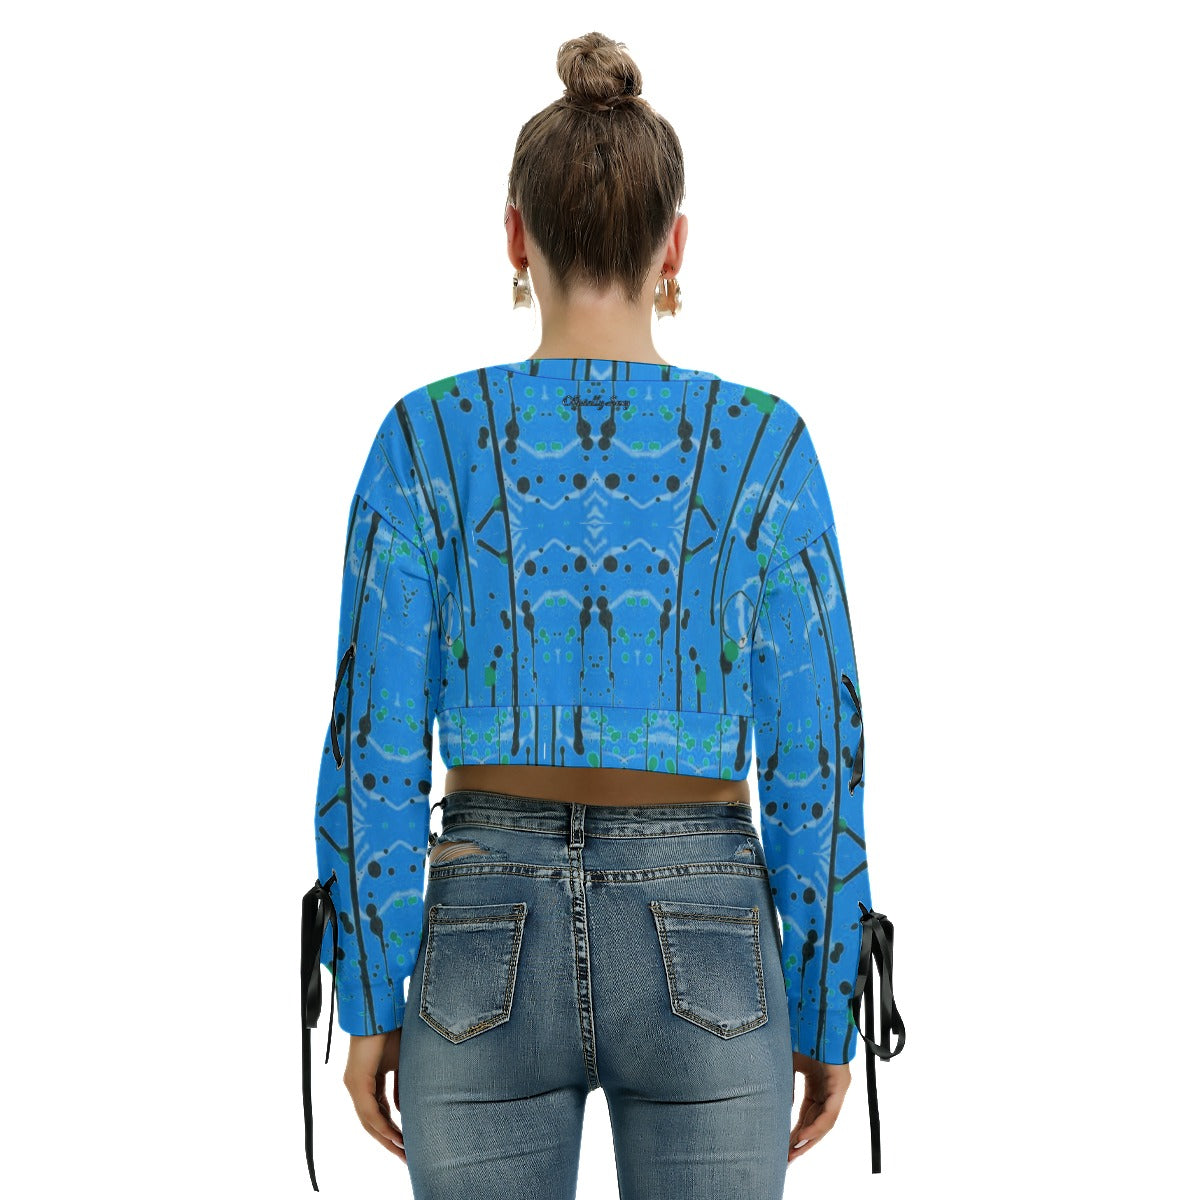 Officially Sexy Creepy Boy Collection Women's Long Sleeve Cropped Powder Blue Sweatshirt With Lace-up Sleeves Back